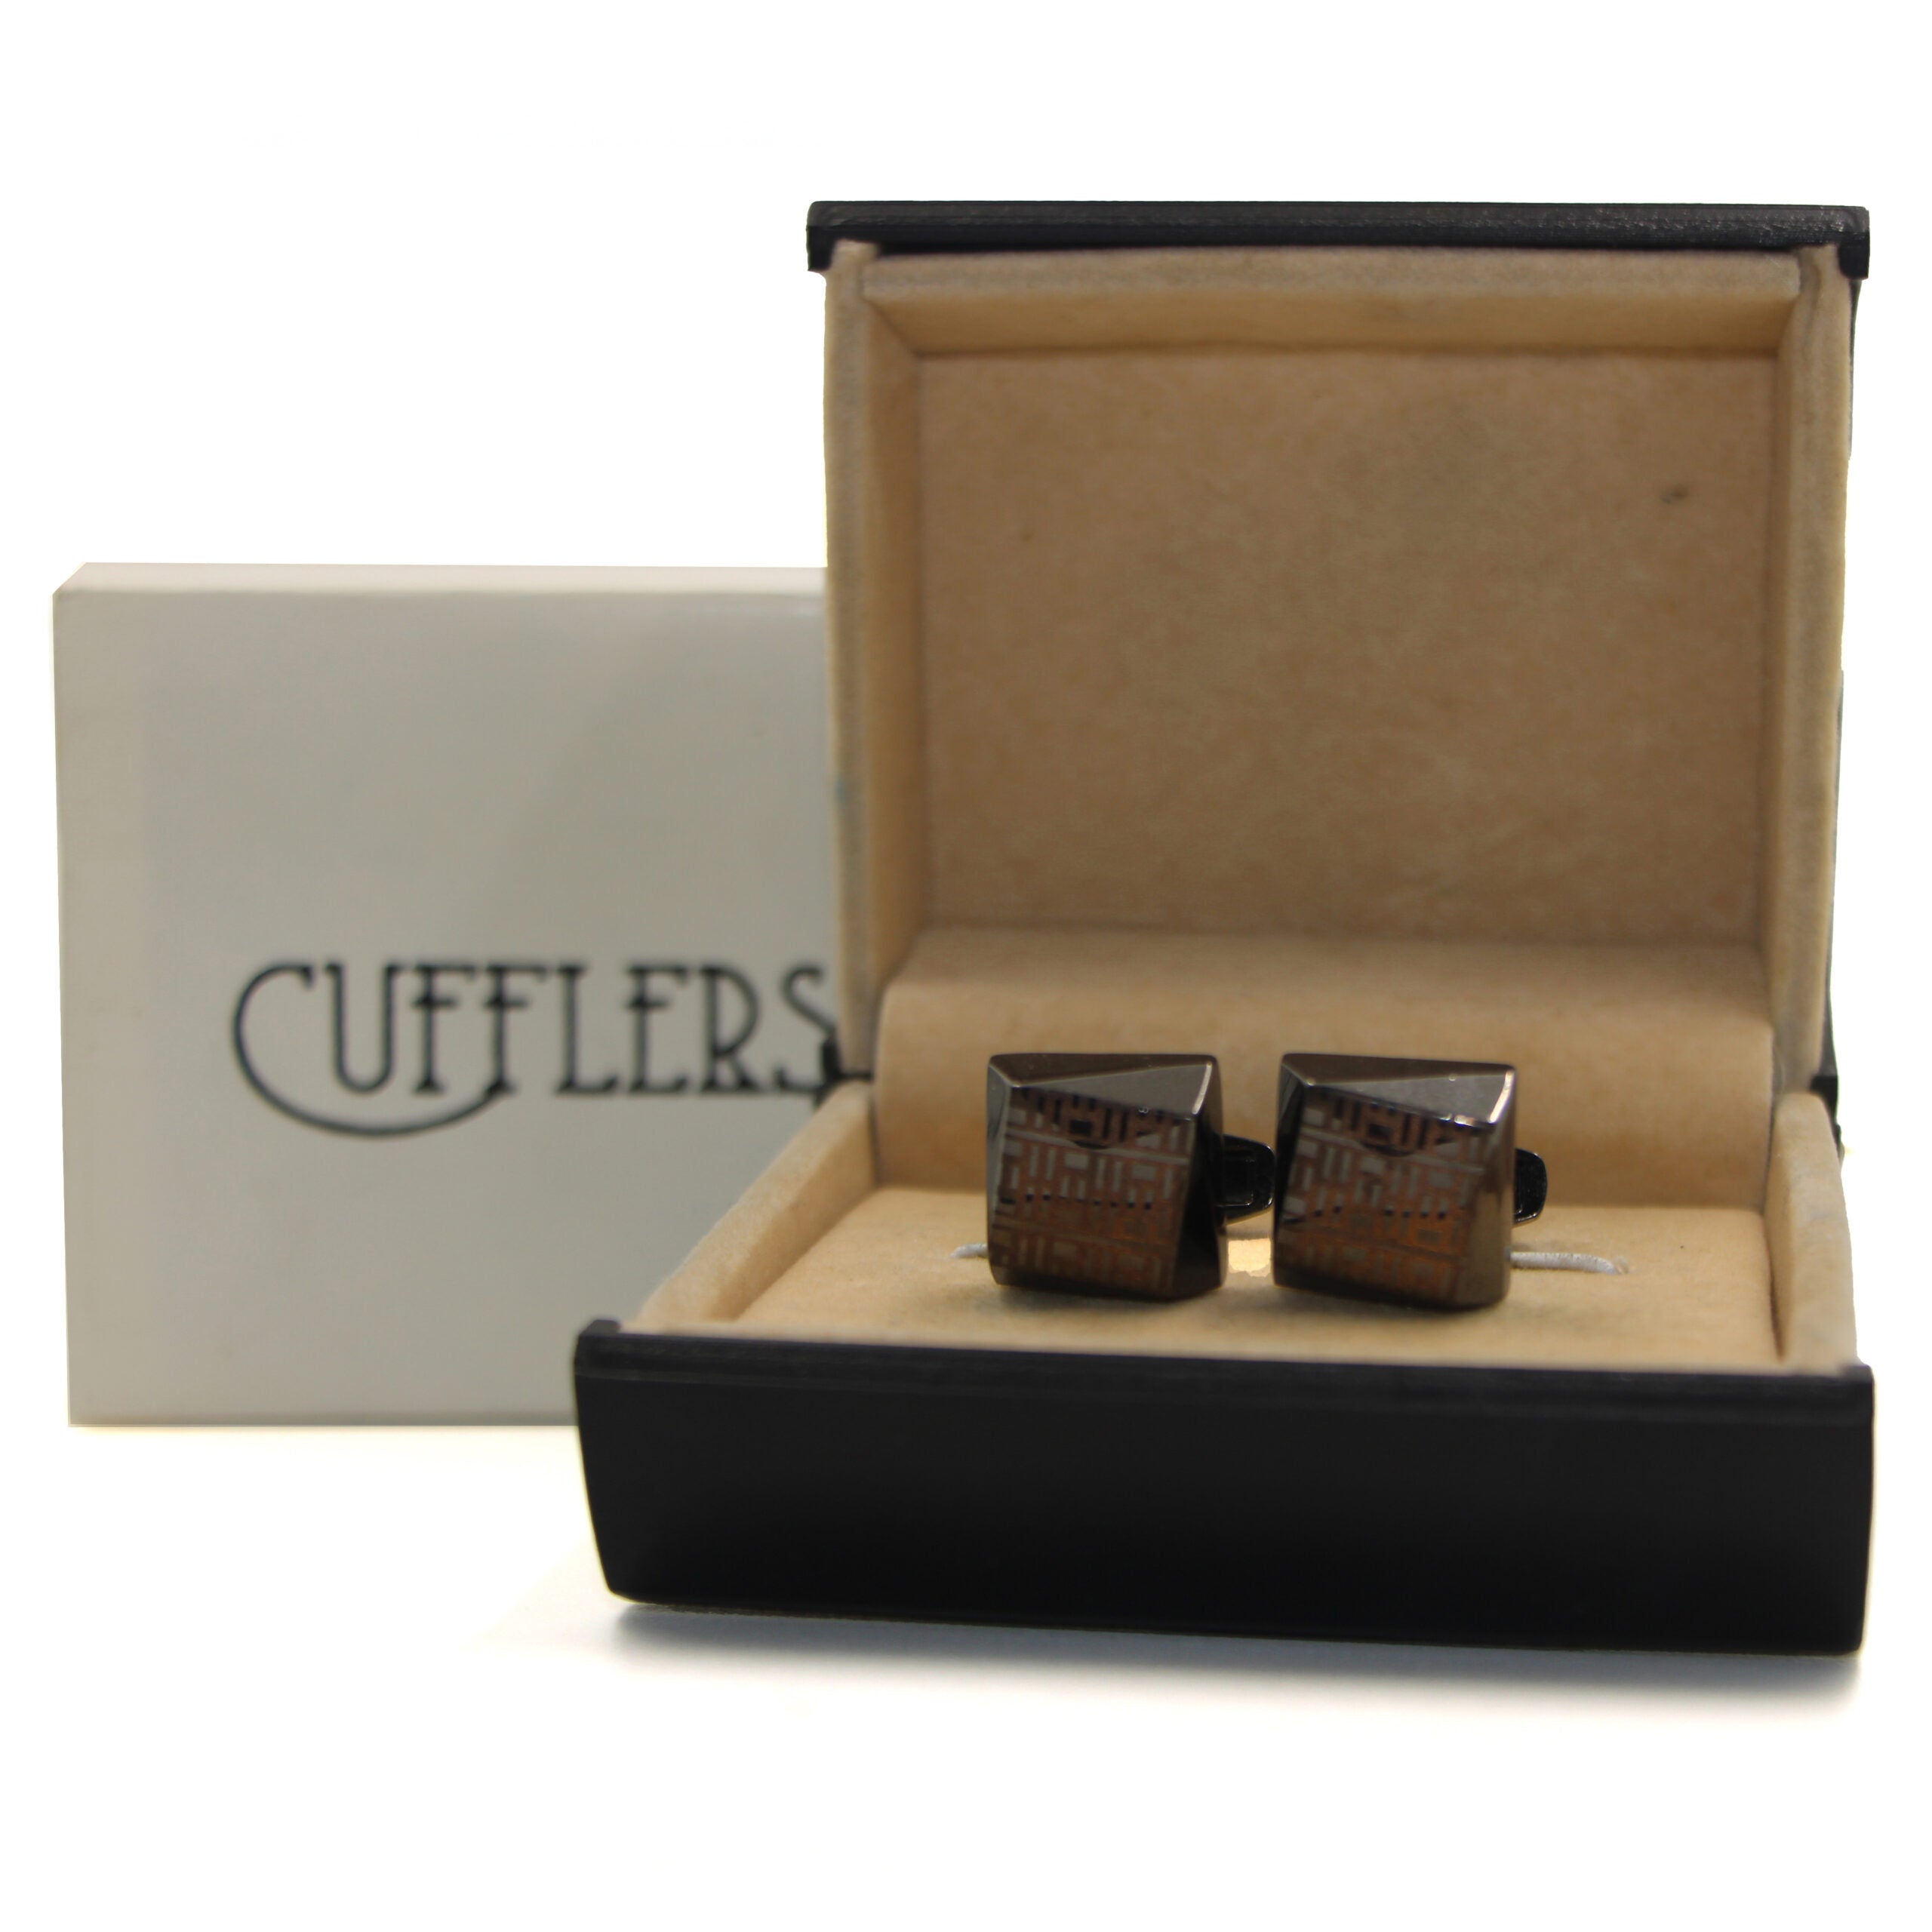 Classic Cufflinks for Men's Shirt with a Gift Box - CU-0012